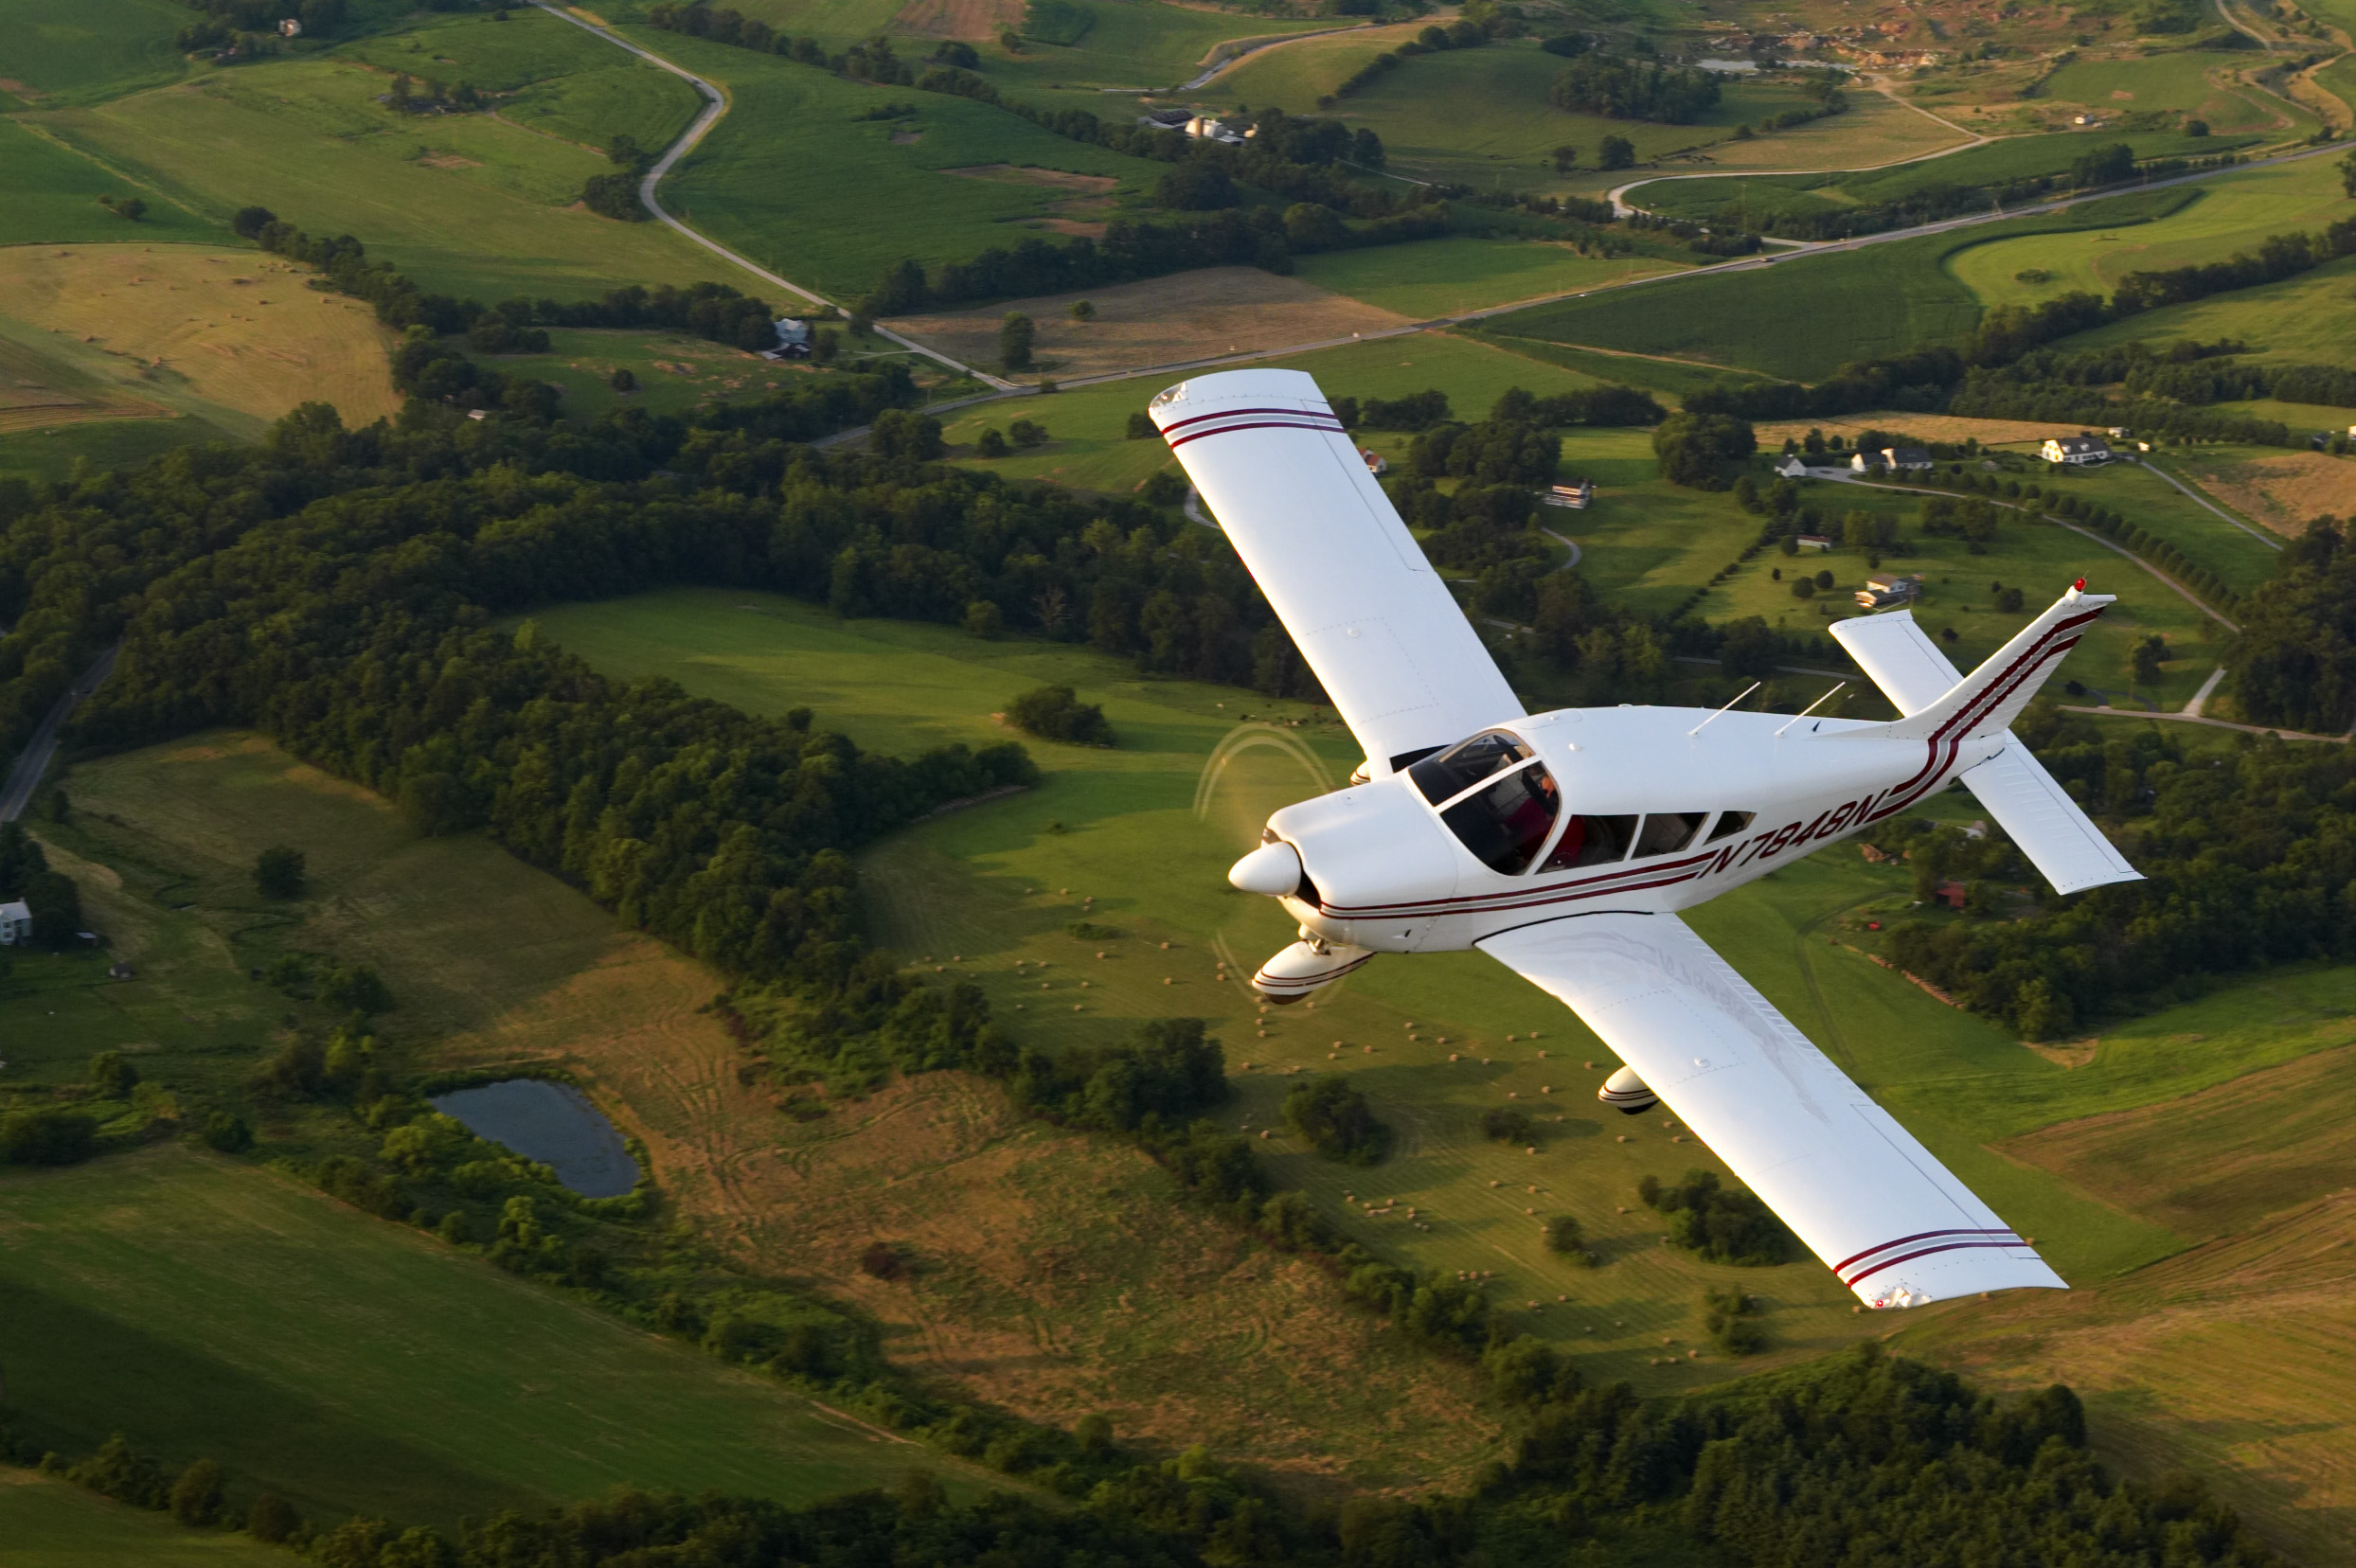 Piper Cherokee 180 over Maryland.
Reproduction of this image prohibited without written permission on photographer's invoice stating rights granted, and payment in full of said invoice.